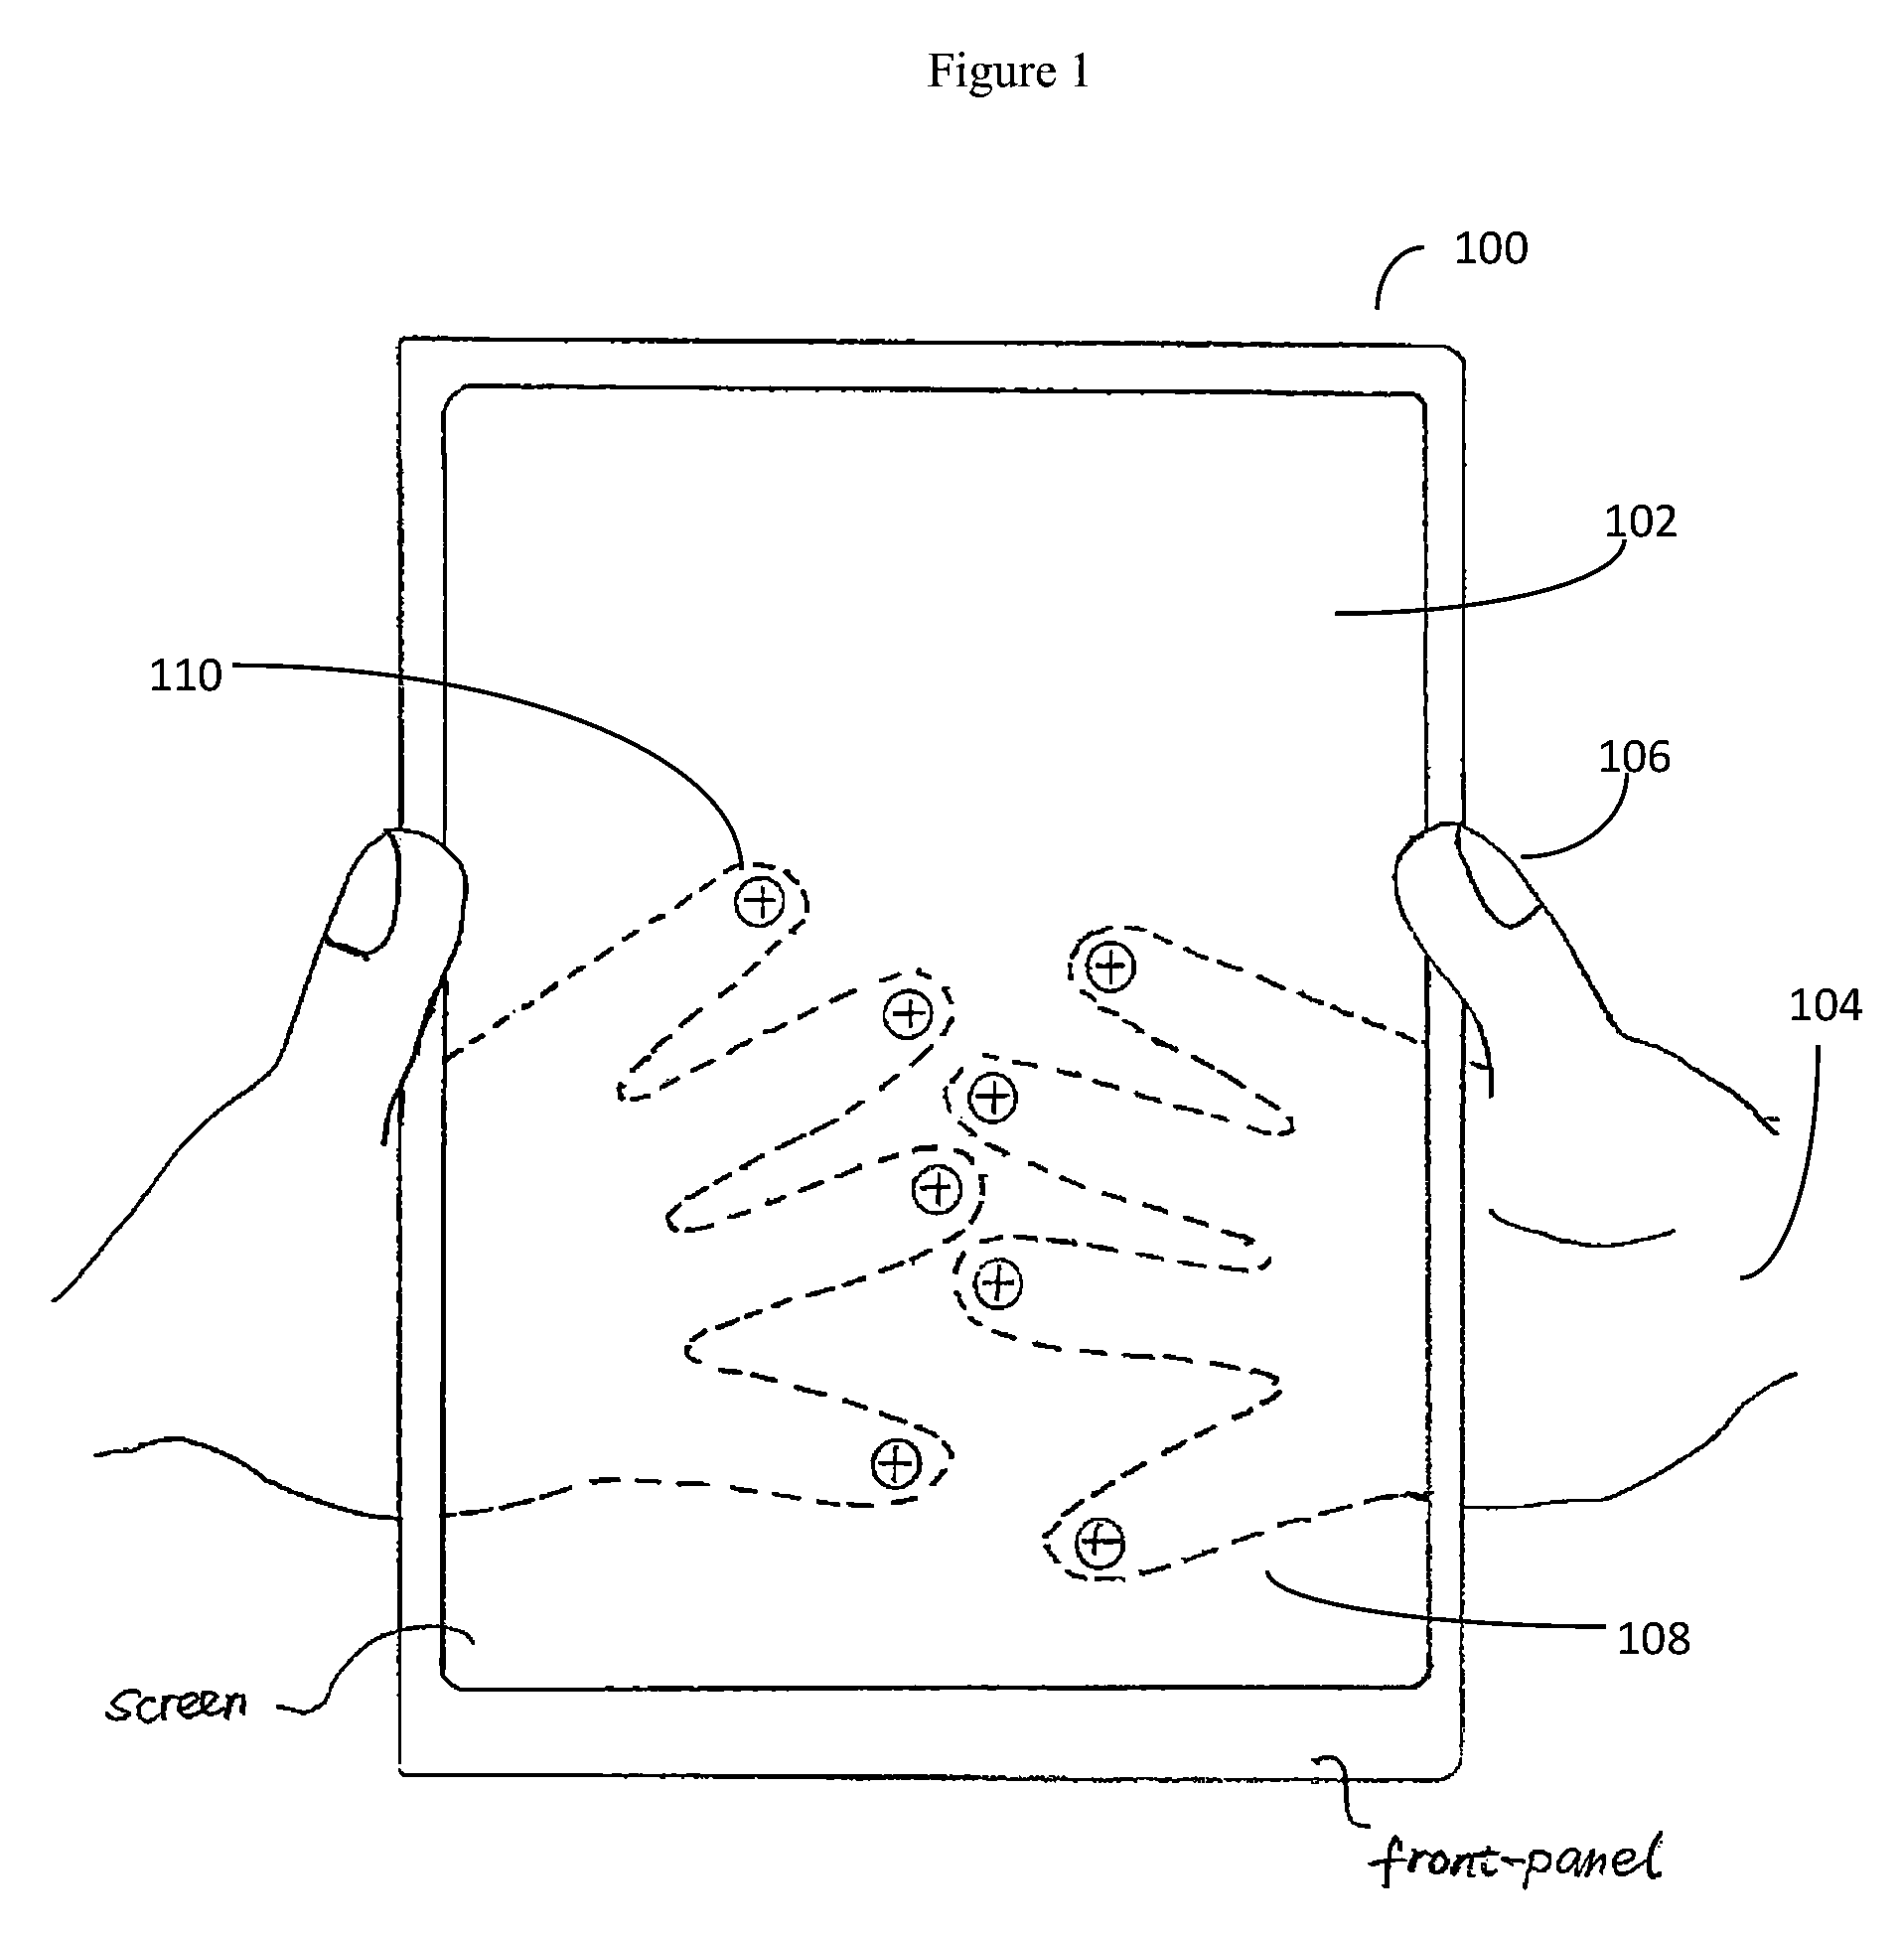 Method for user input from alternative touchpads of a handheld computerized device